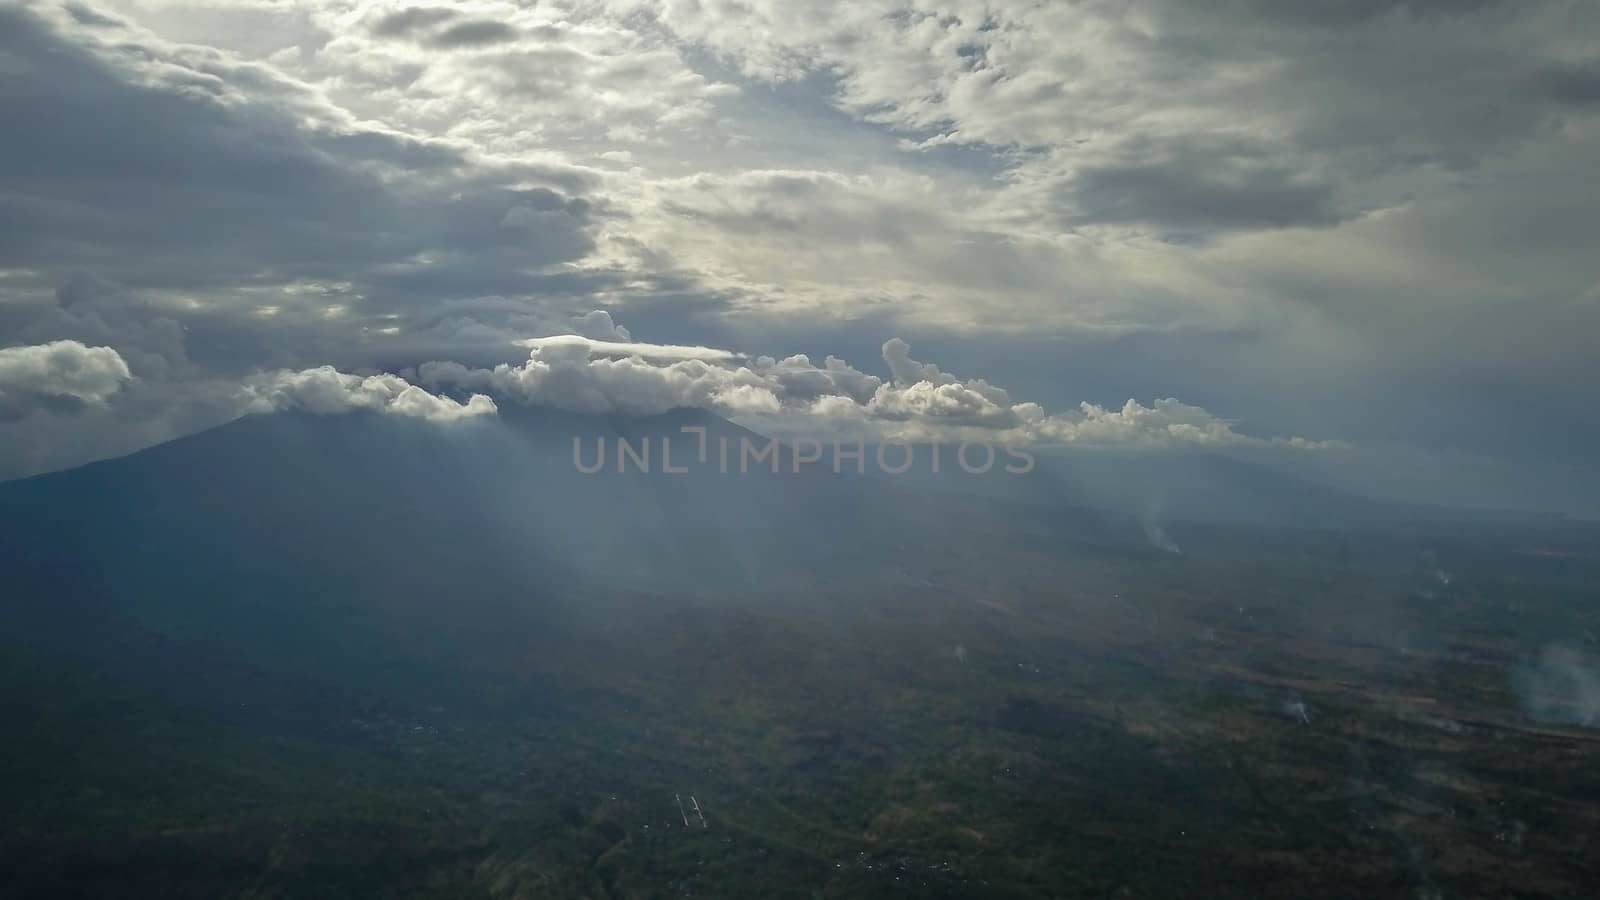 volcano with cloudy clear sky. Mount Merapi in Indonesia. Cloudy sky with a volcano in the background. Clouds around the top of the mountain. The sun's rays shine through the clouds.